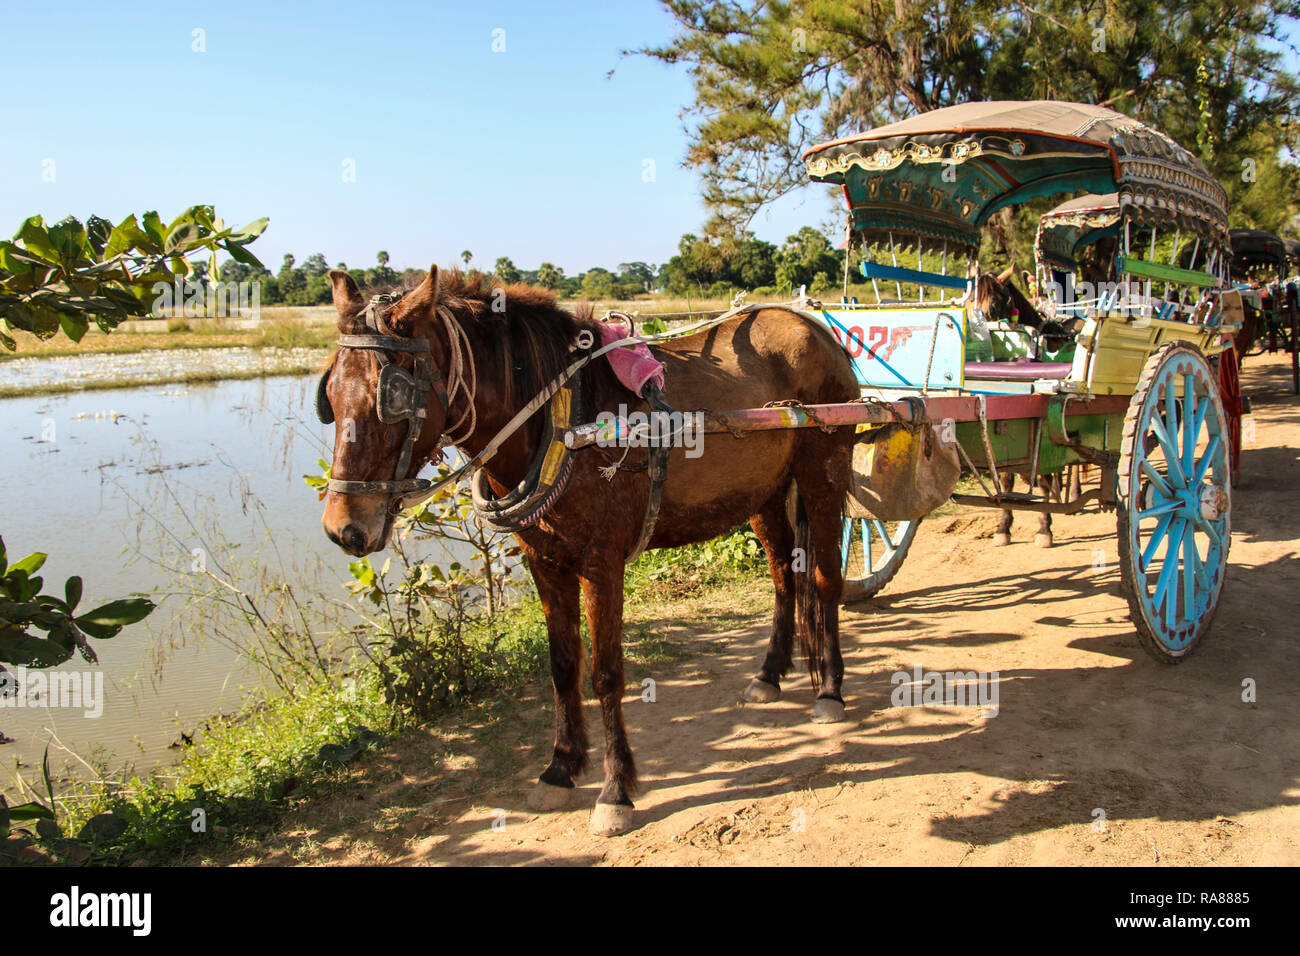 Horse carriage at the Bagan Archaeological Zone, Myanmar (Burma) Stock Photo